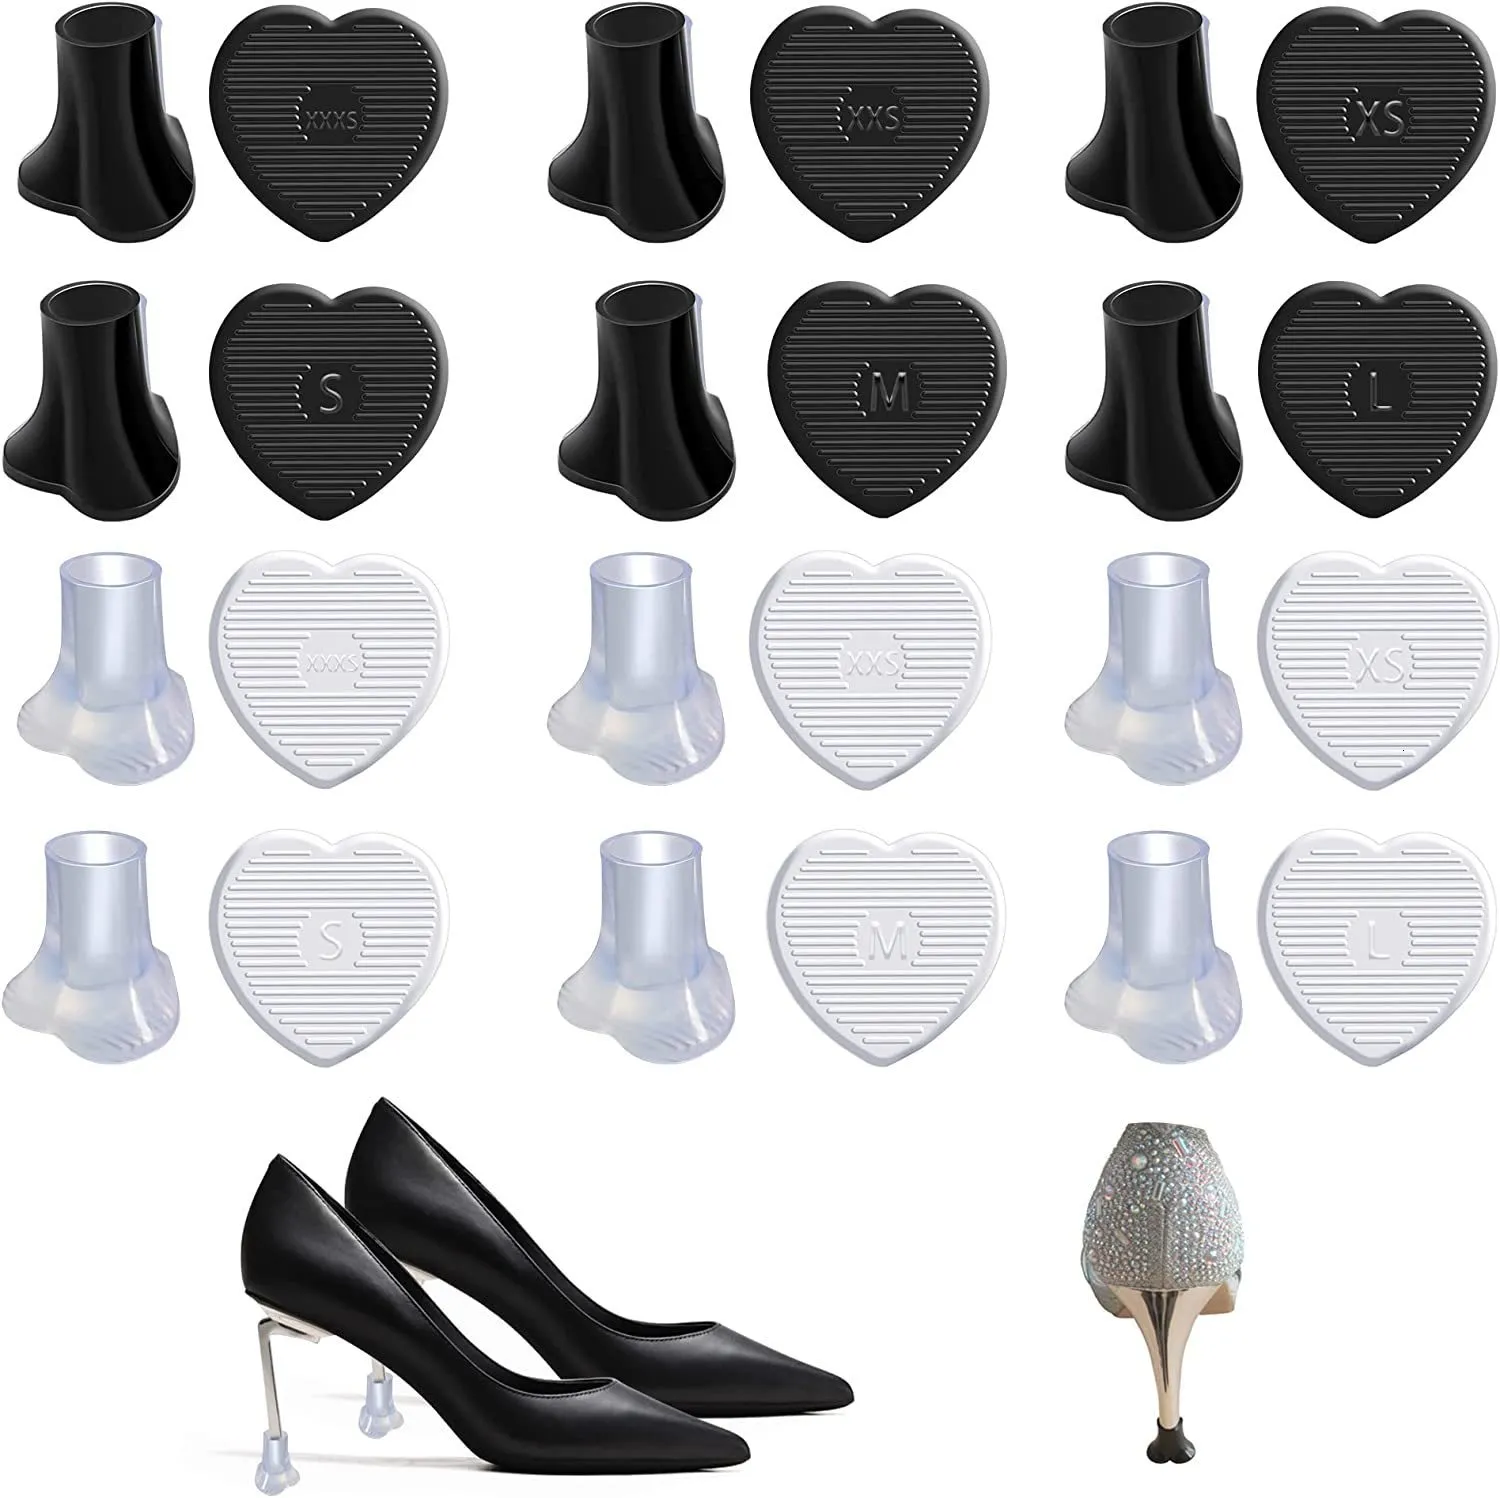 Shoe Parts Accessories 10Pairs High Heel Protectors Heart Shaped Glittery Clear Stoppers Walking on Gras Shoes Outdoor Graden Wedding Party 230804